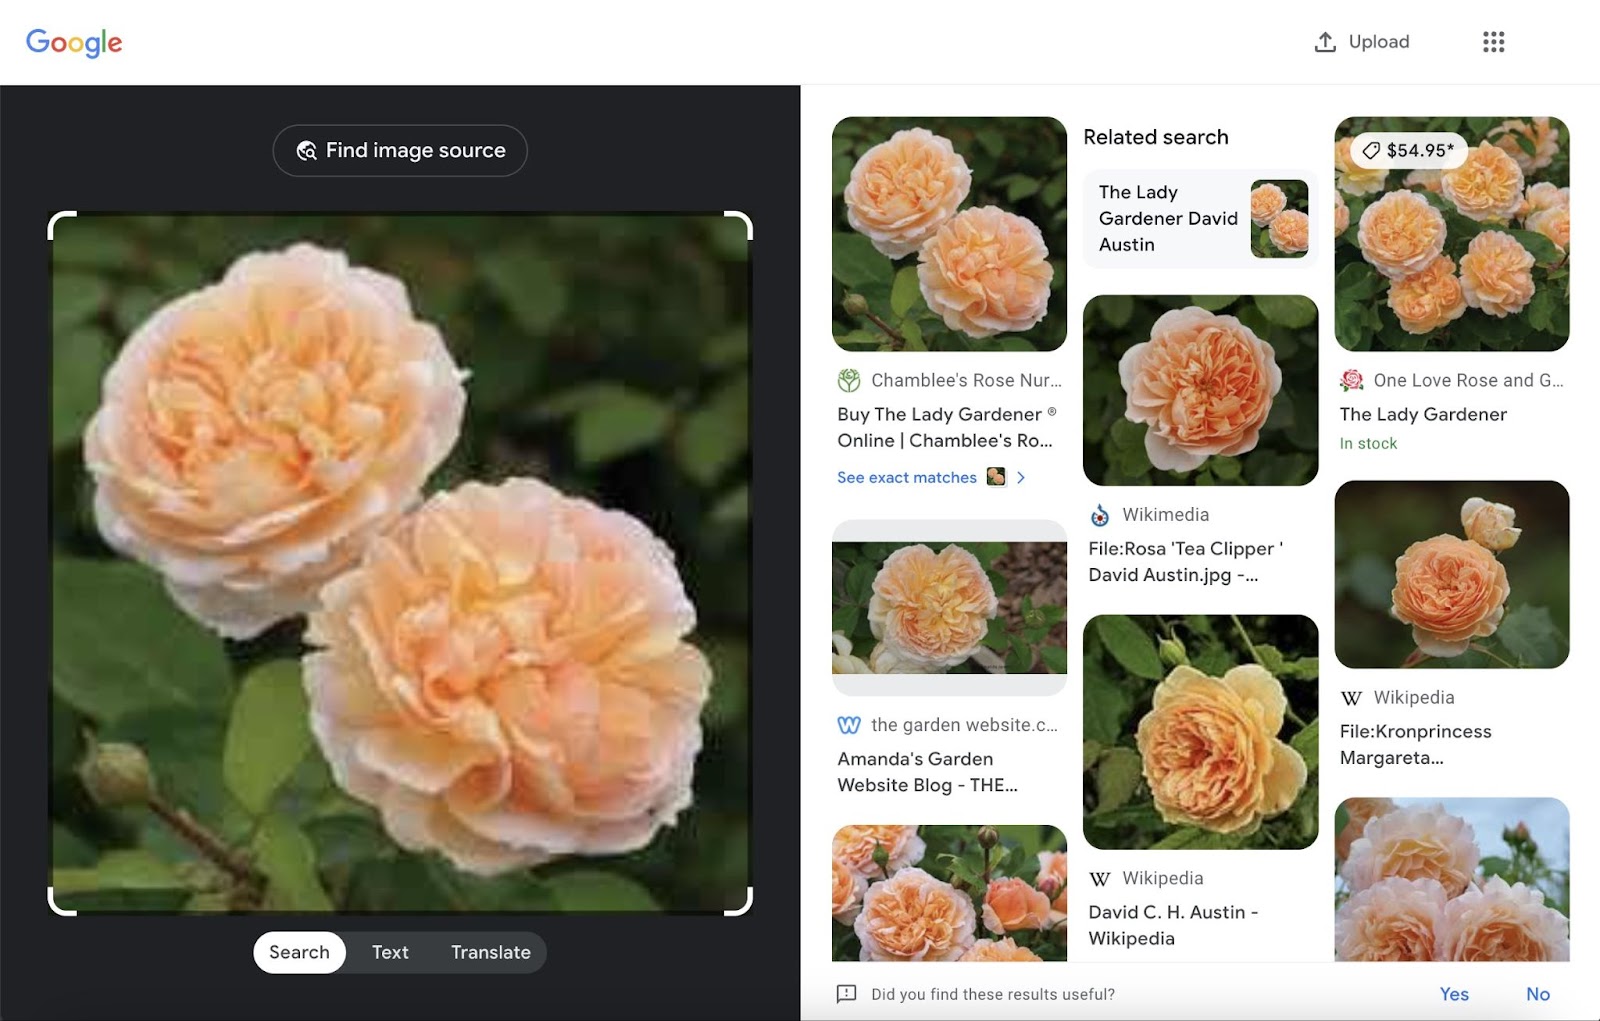 Google Lens image search shows similar looking apricot roses